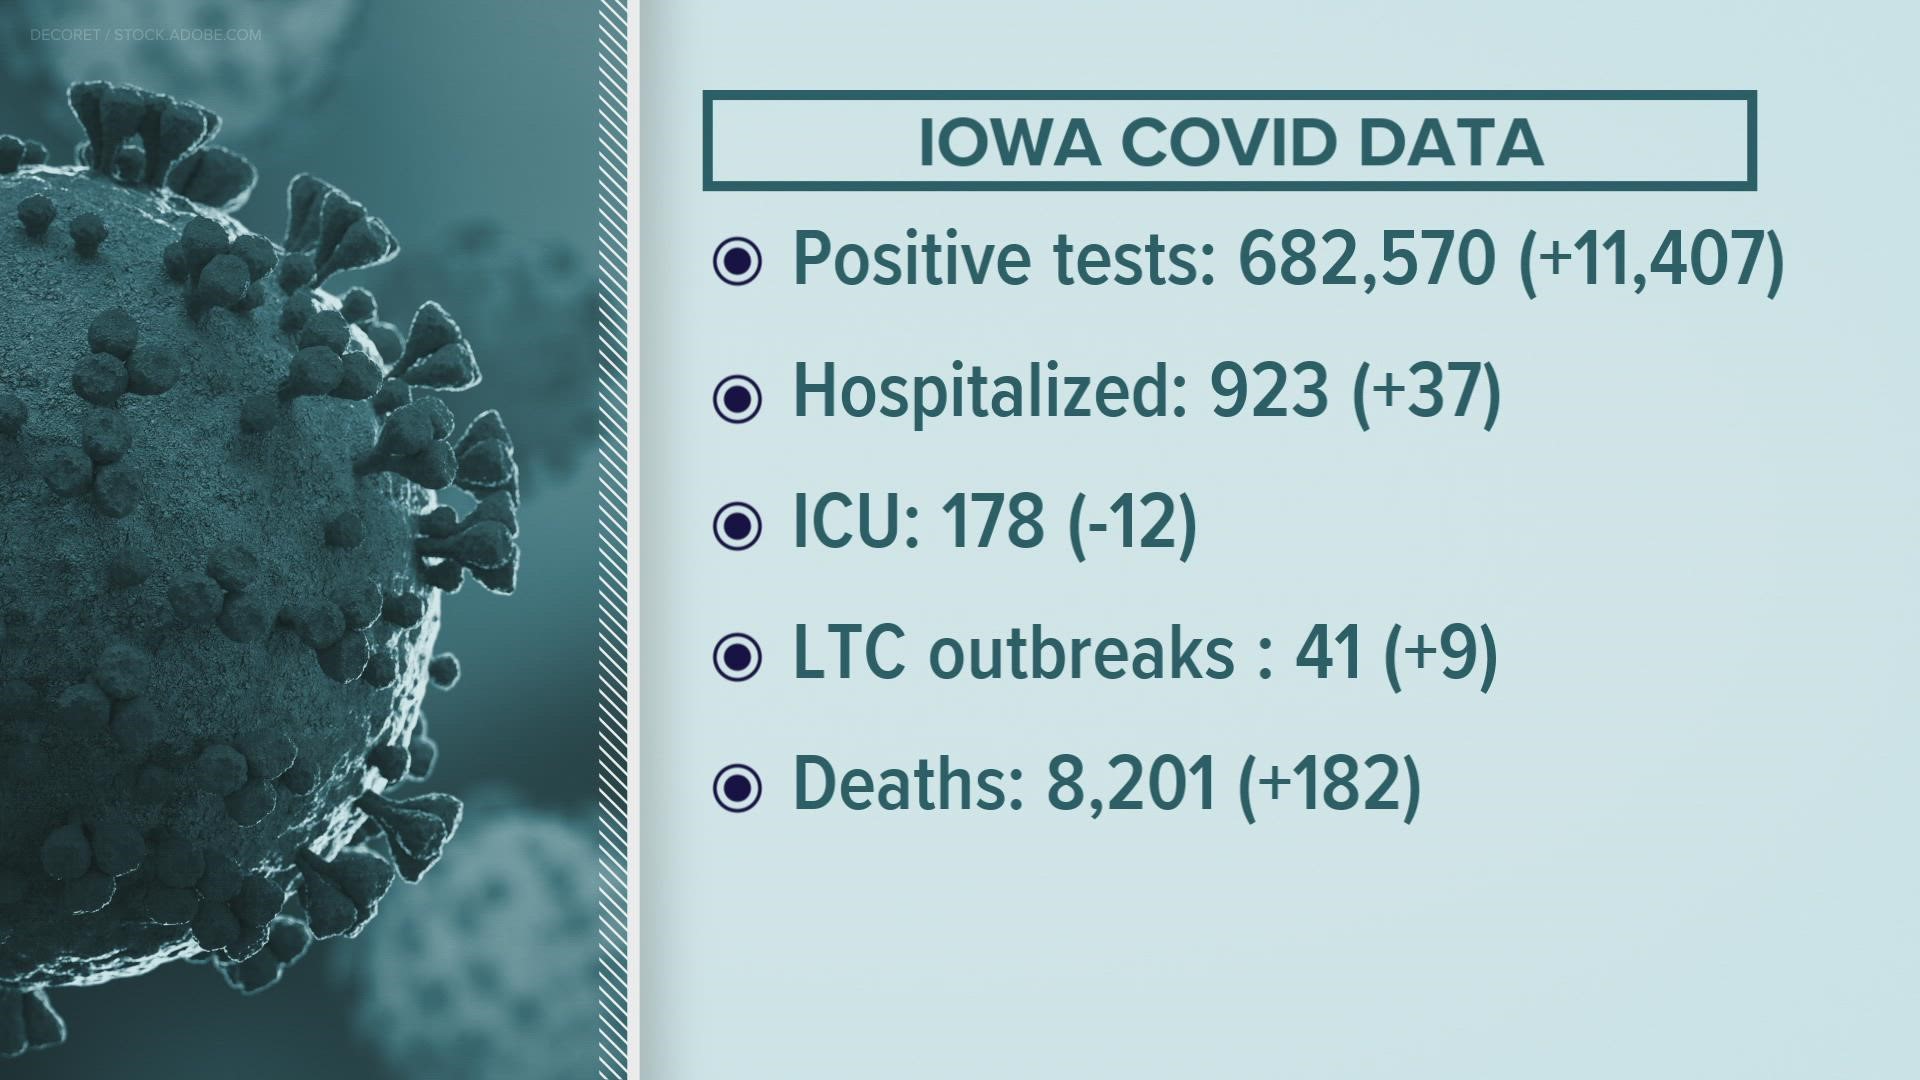 The Iowa Department of Public Health has added vaccination data for kids 5 to 11 years old.